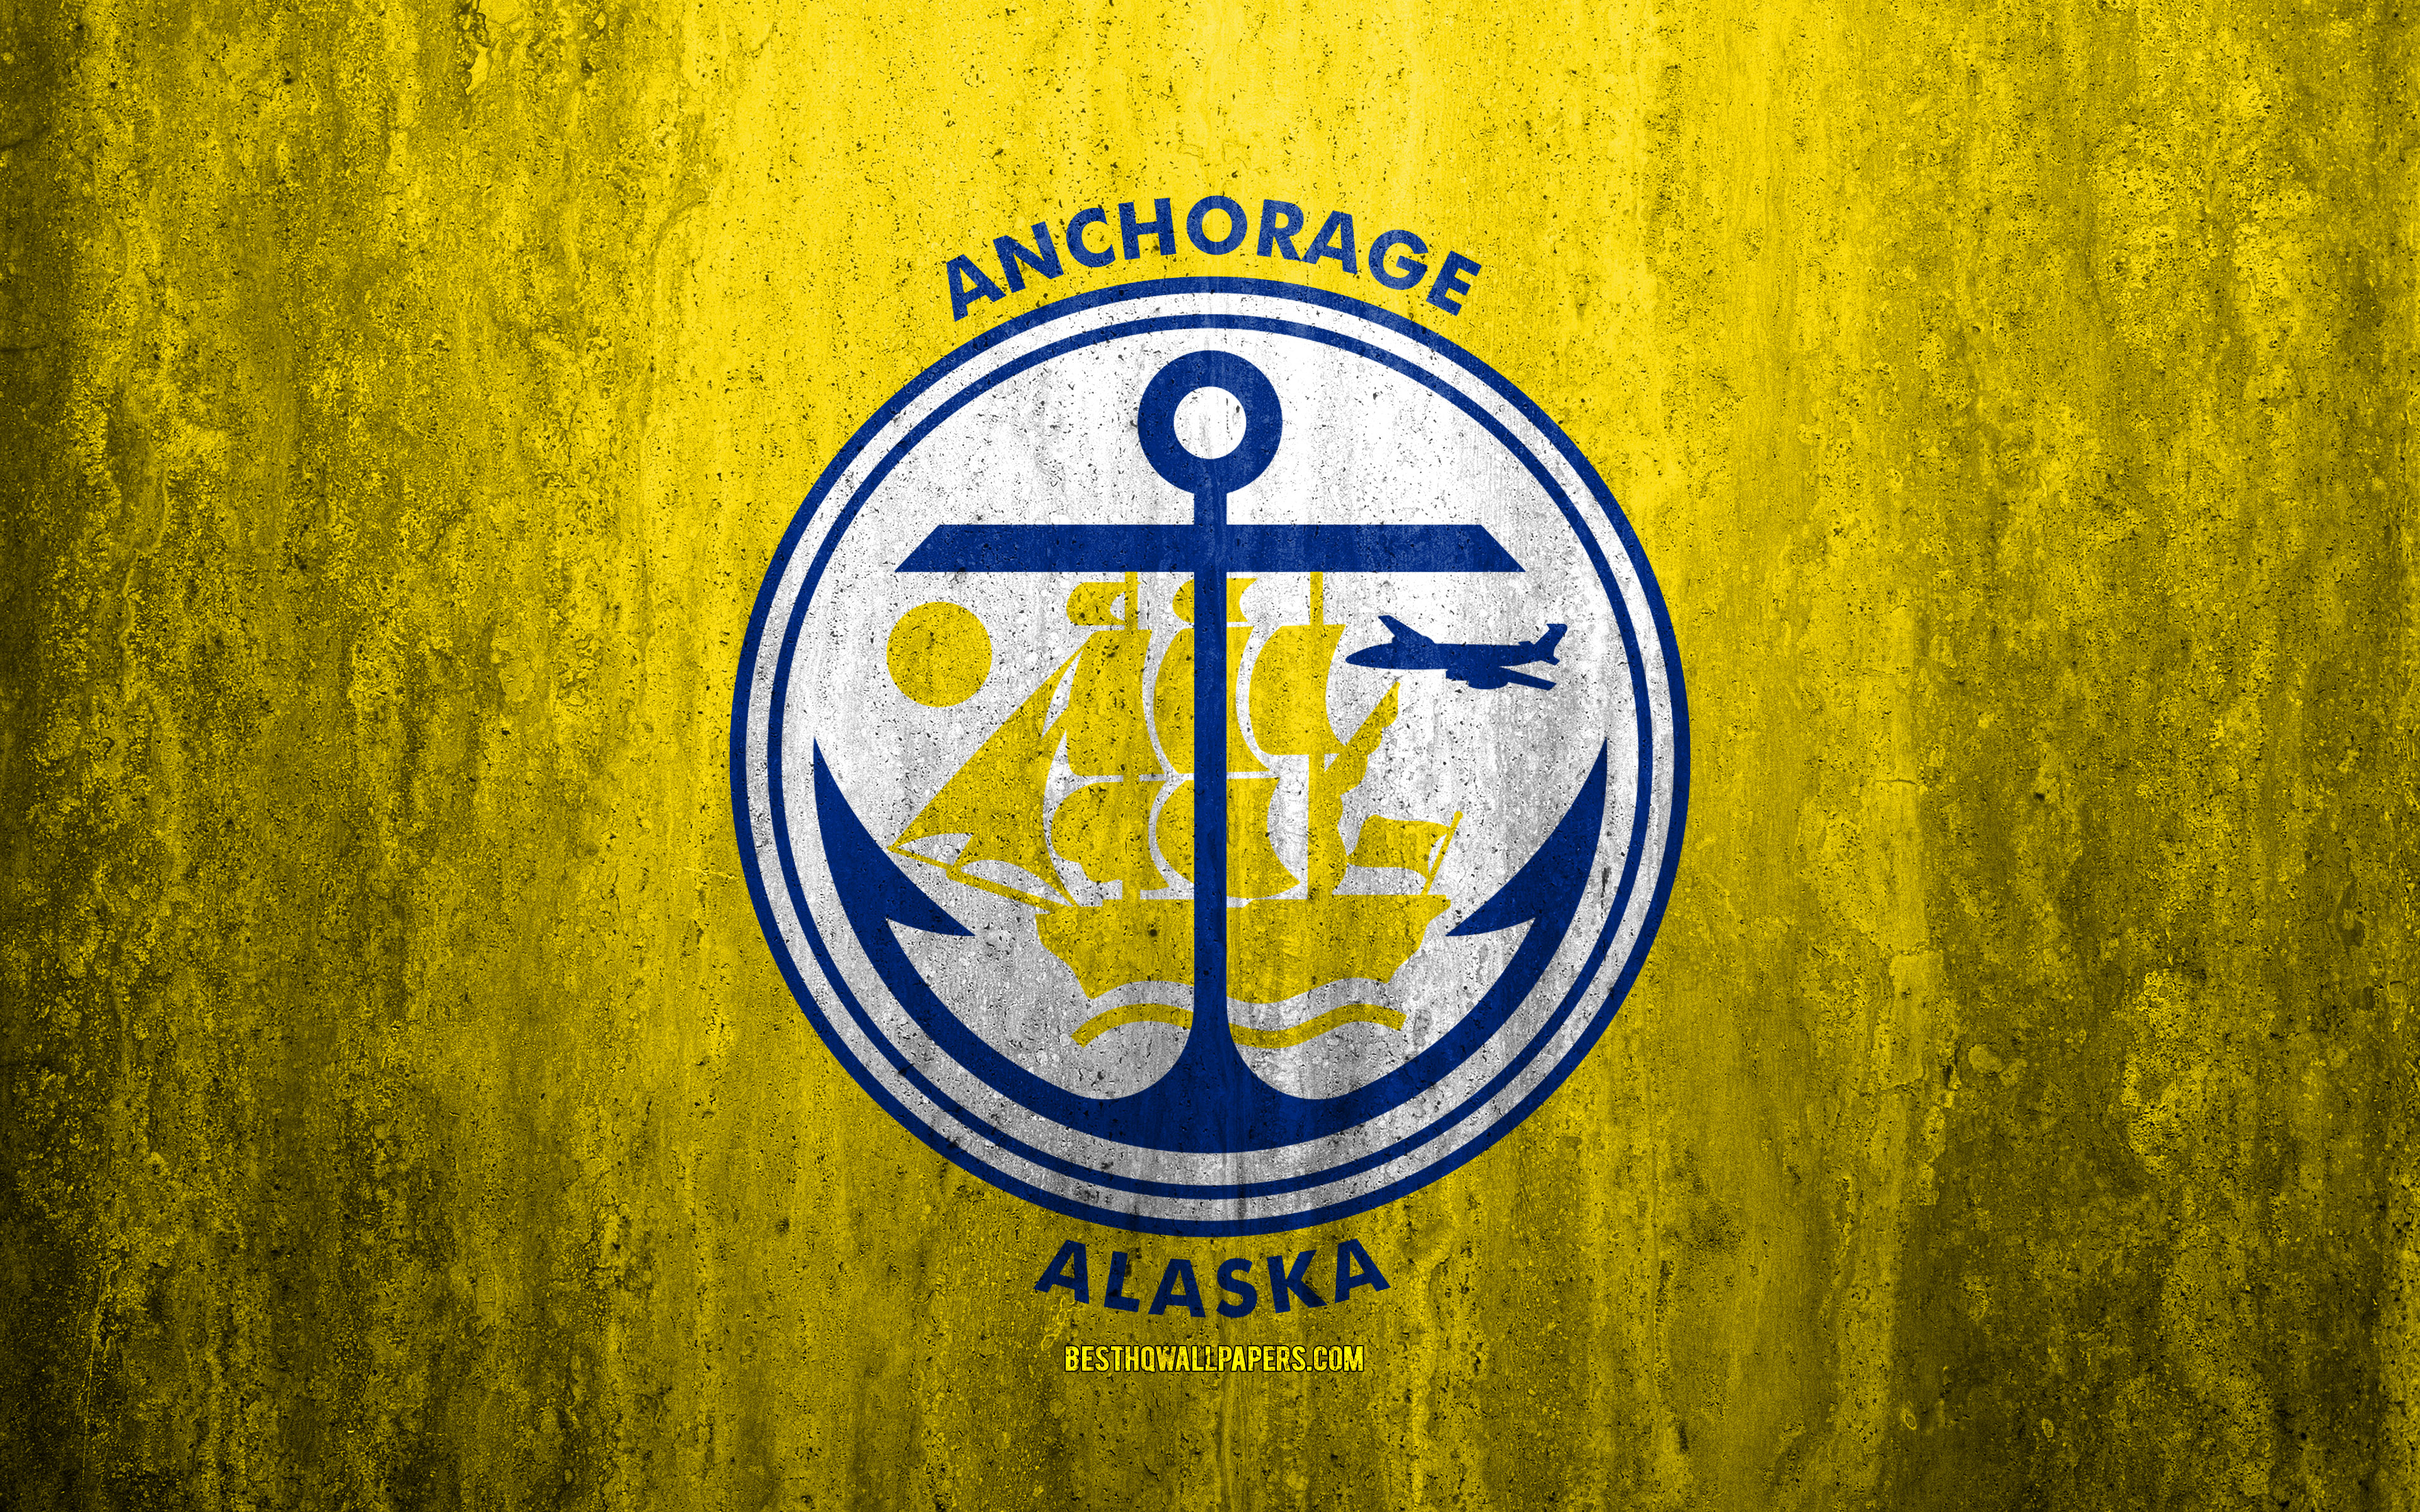 Download wallpaper Flag of Anchorage, Alaska, 4k, stone background, American city, grunge flag, Anchorage, USA, Anchorage flag, grunge art, stone texture, flags of american cities for desktop with resolution 3840x2400. High Quality